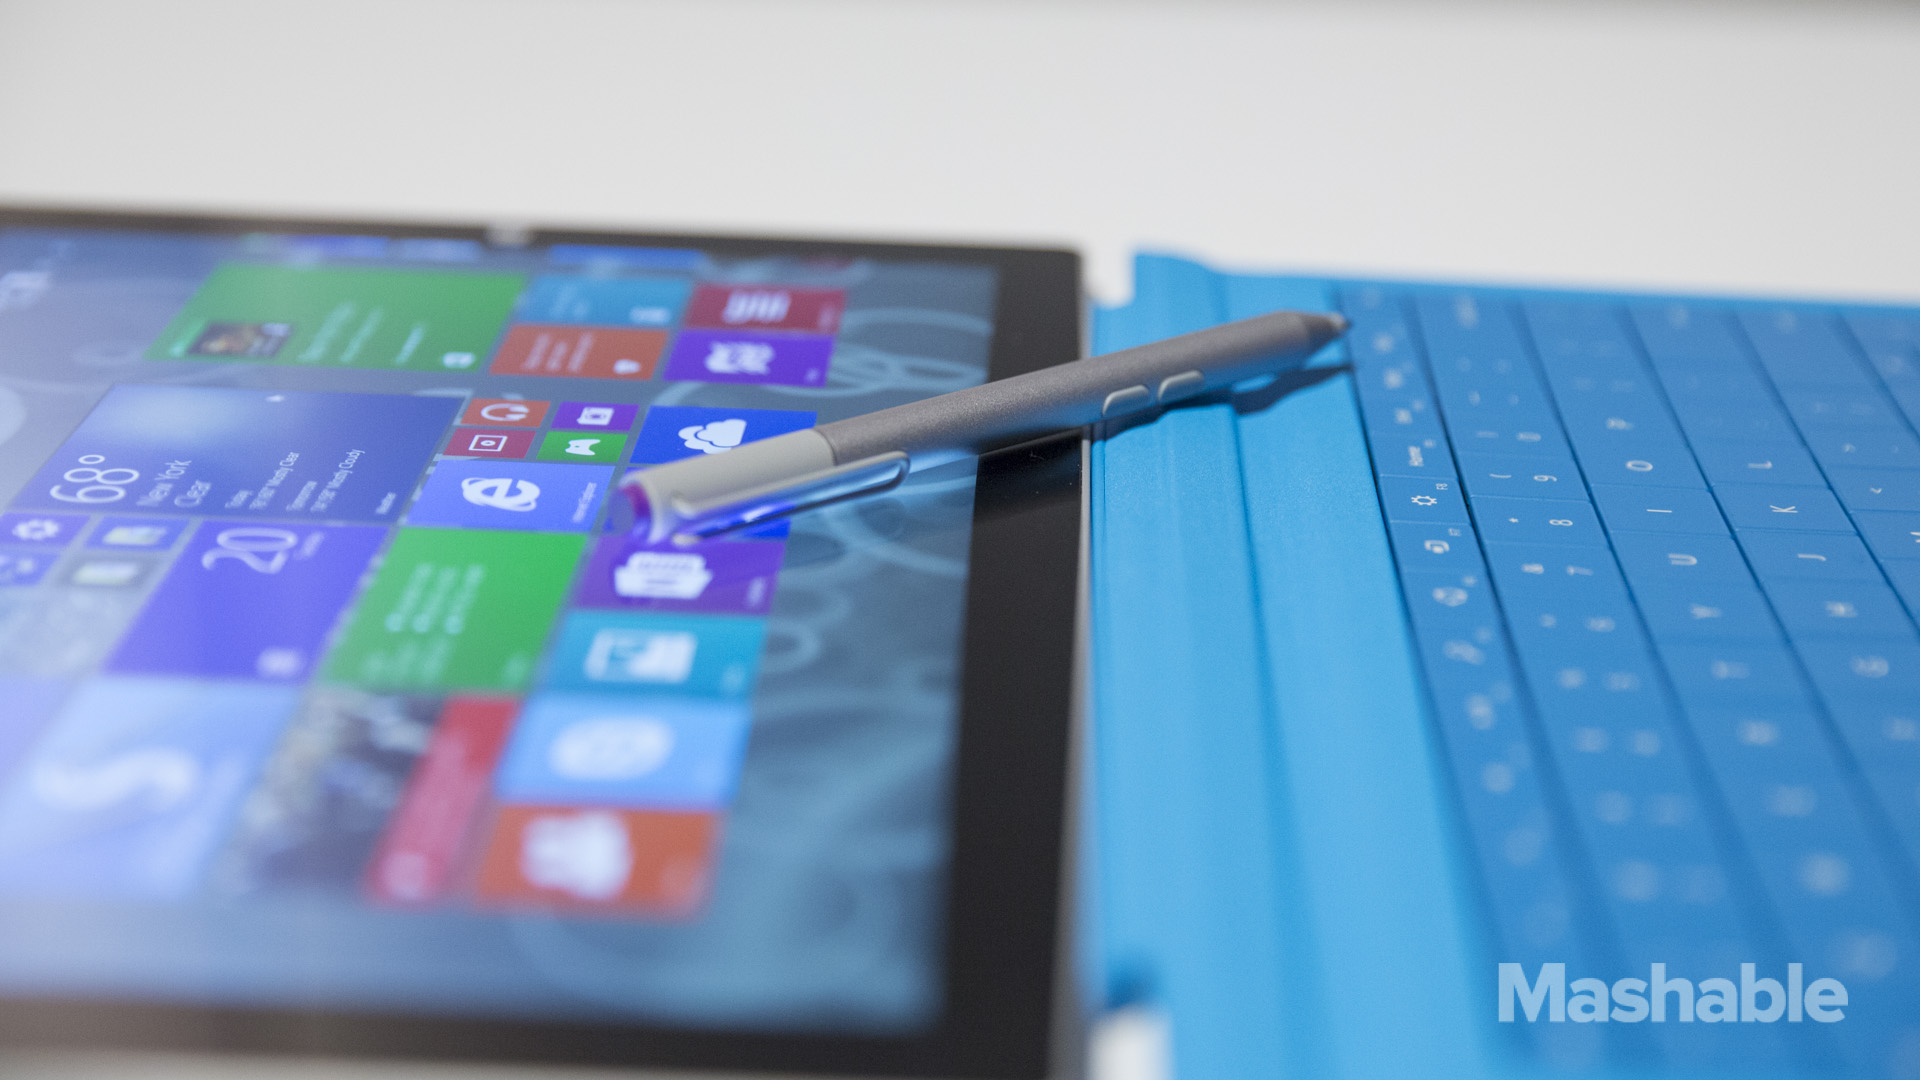 Microsoft Worked To Make The Pen Experience With The - Smartphone - HD Wallpaper 